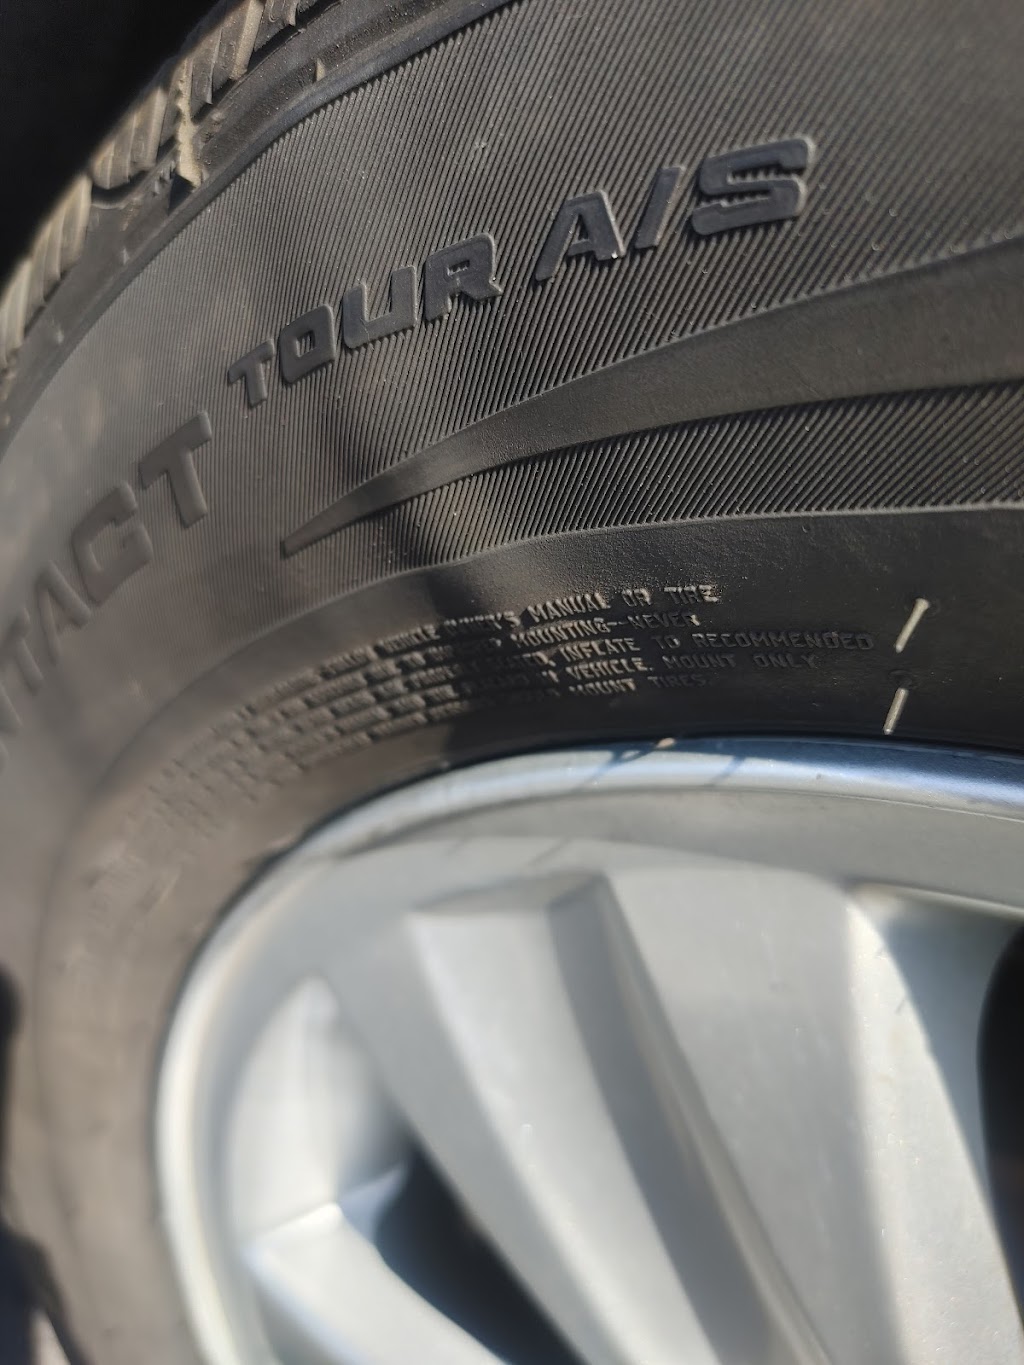 Luis Tires | 2466 N Marks Ave, Fresno, CA 93722, USA | Phone: (559) 277-3990